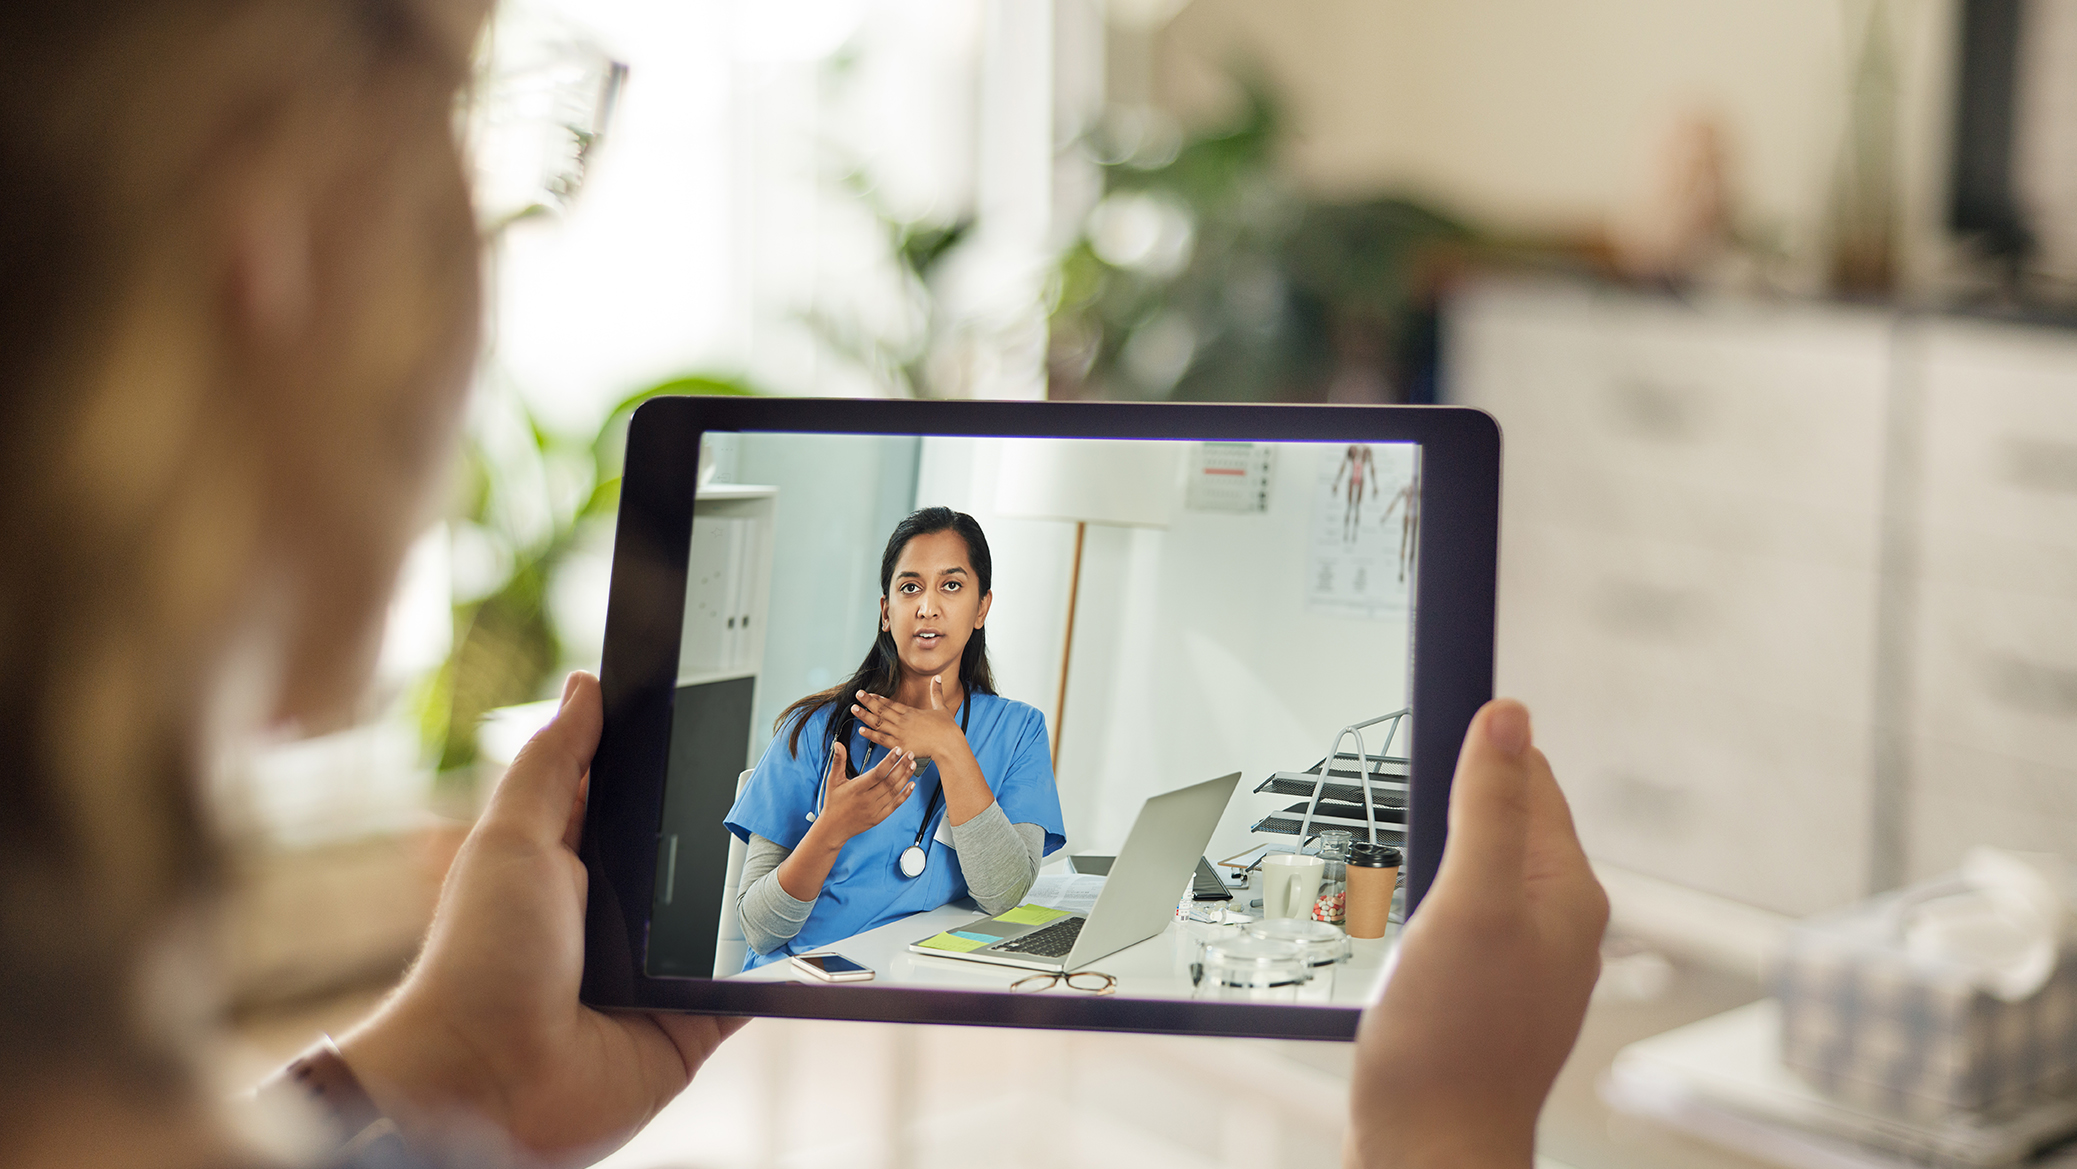 Why marginalized patients don’t trust telehealth